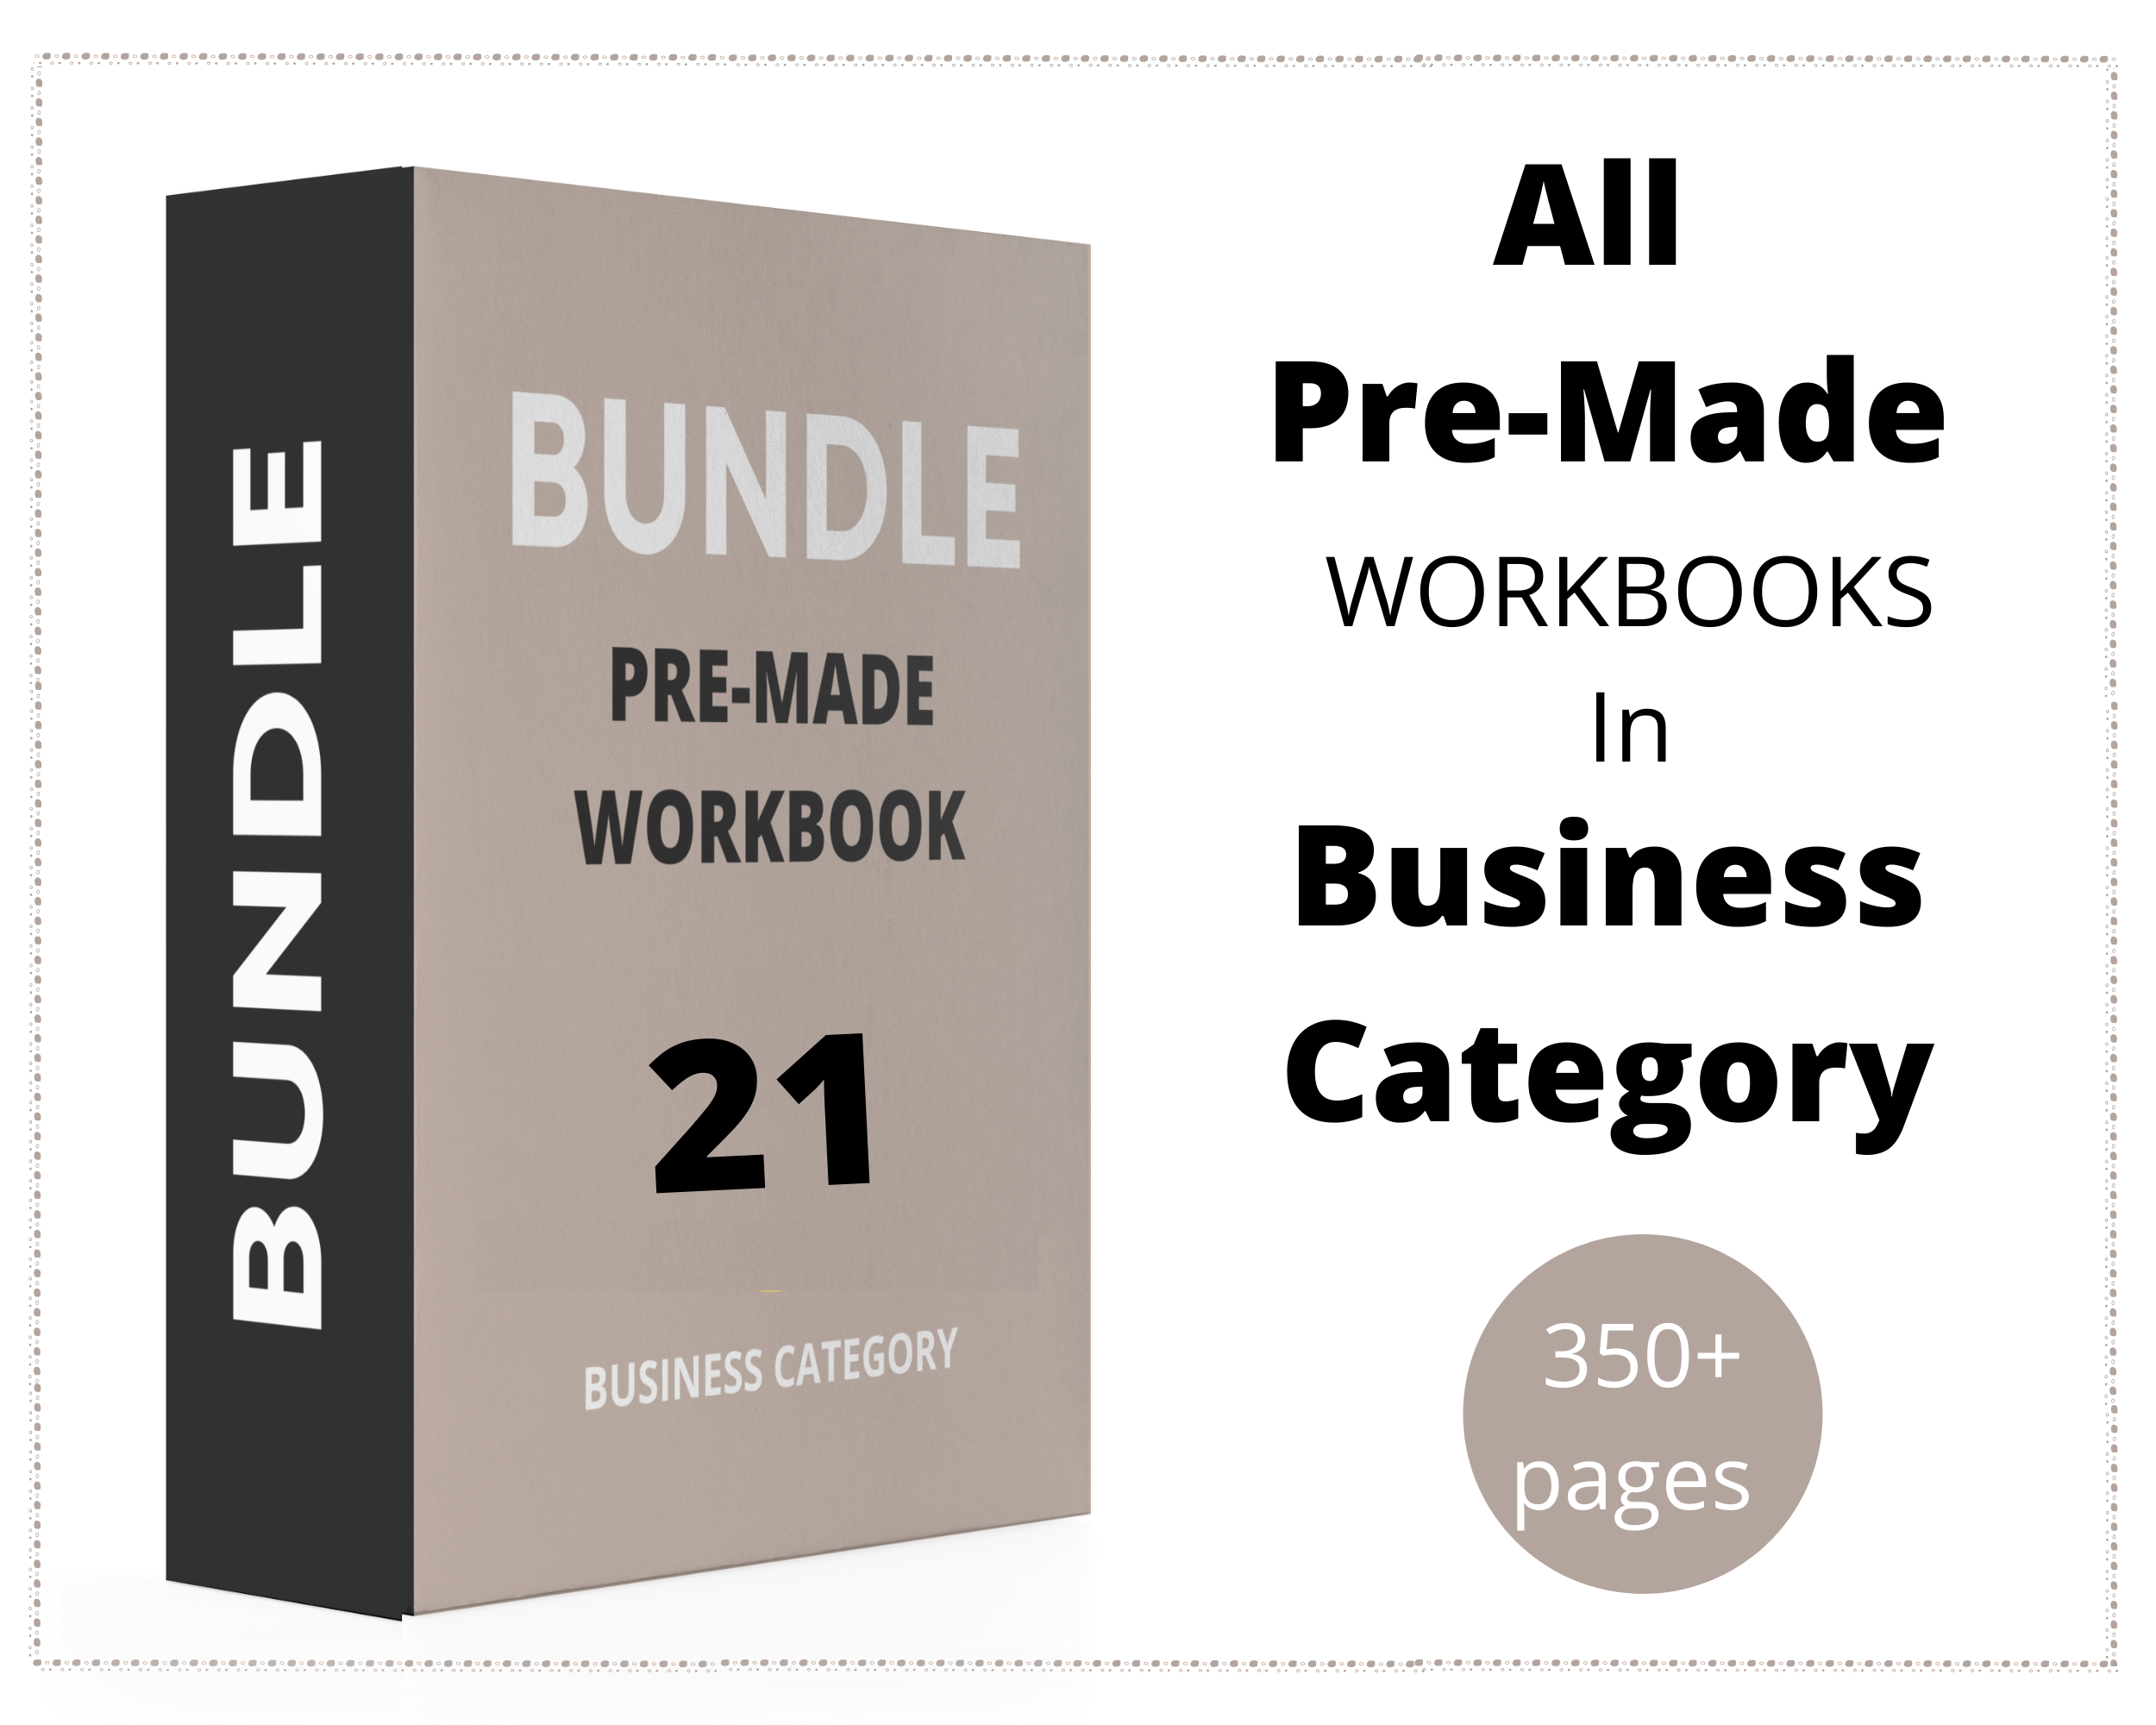 BUNDLE of 19 Business Workbooks | All Access to Everything in Business Workbooks Category | Big Bundle of Workbooks